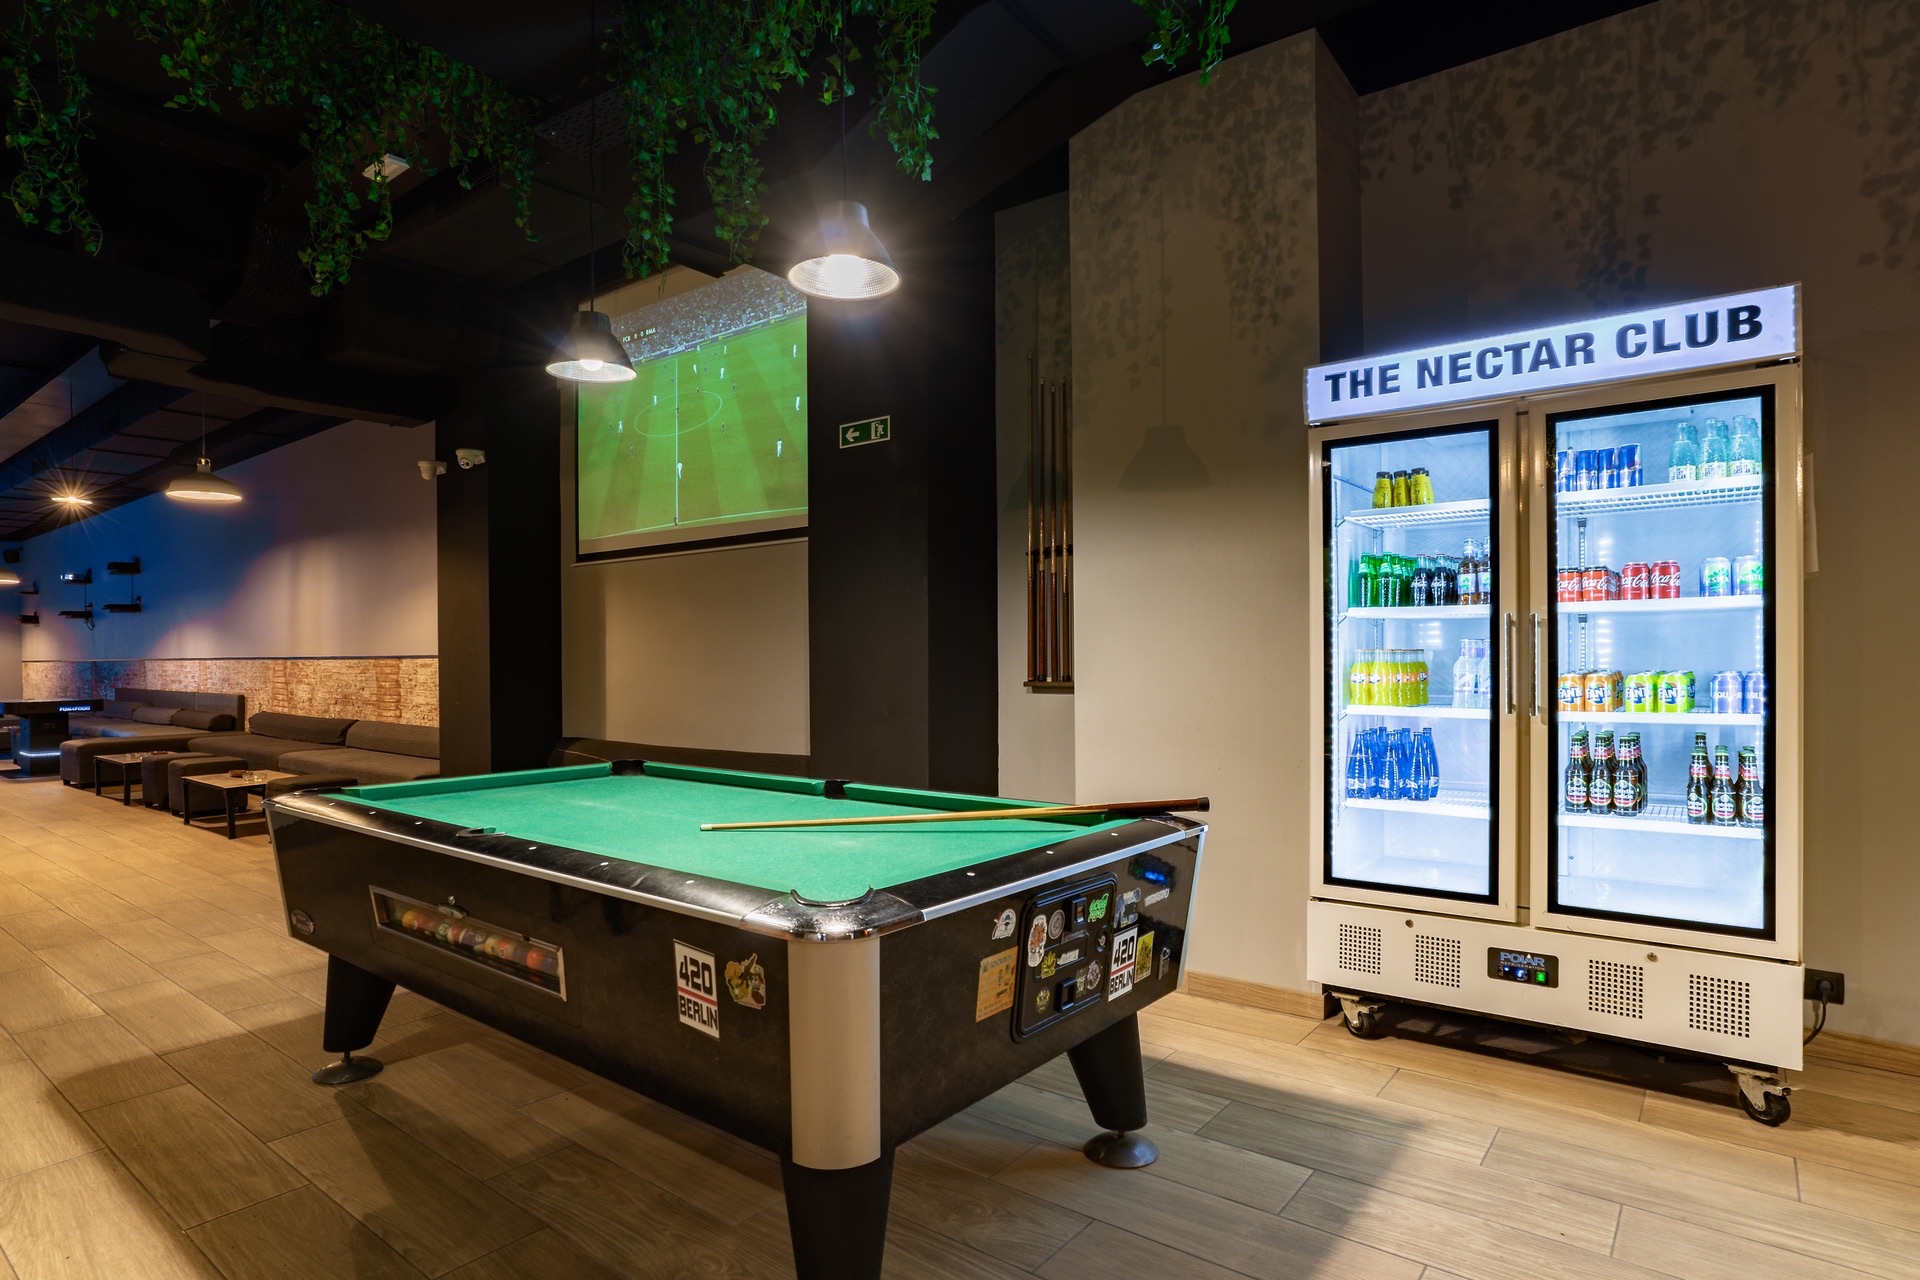 Billiard table and refrigerator with drinks in the Nectar club bcn